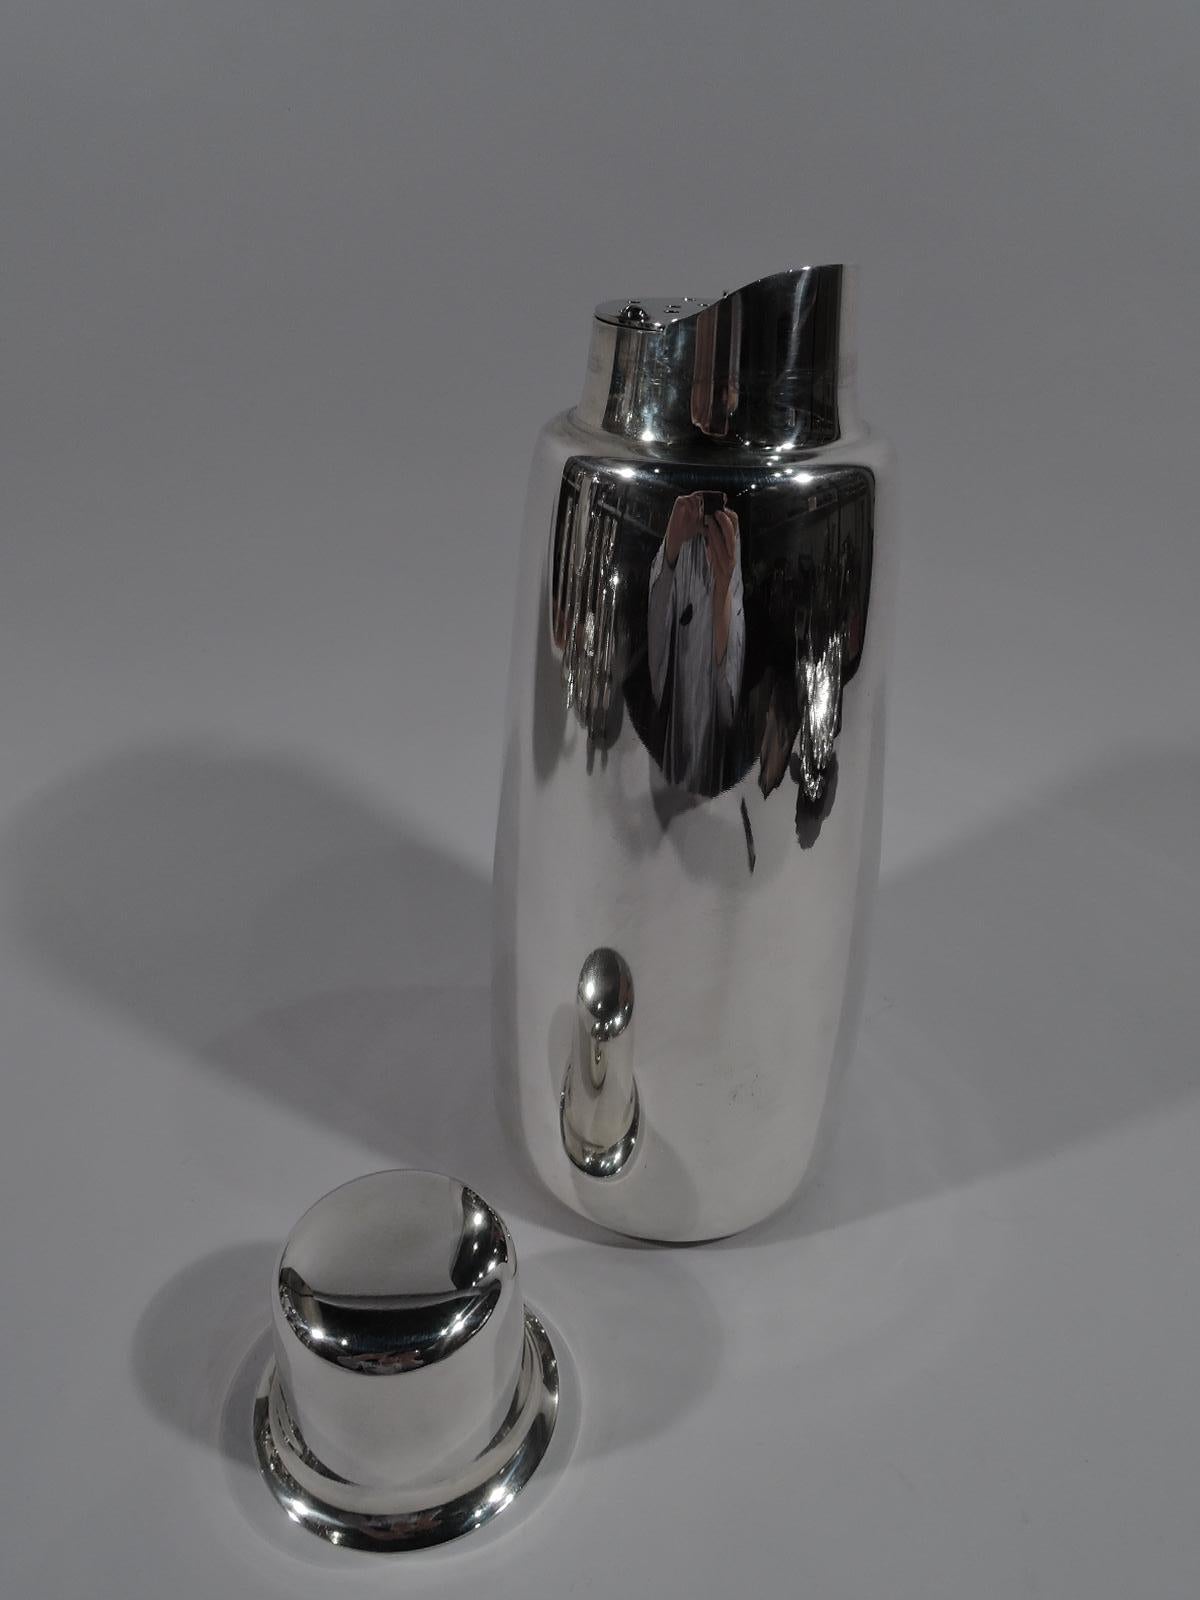 Mid-Century Modern sterling silver cocktail shaker. Made by Tiffany & Co. in New York. Upward tapering sides, short and inset neck with arched rim spout, and side-hinged pierced strainer. Jigger cover has flared rim. Gilt interior. Sleek and